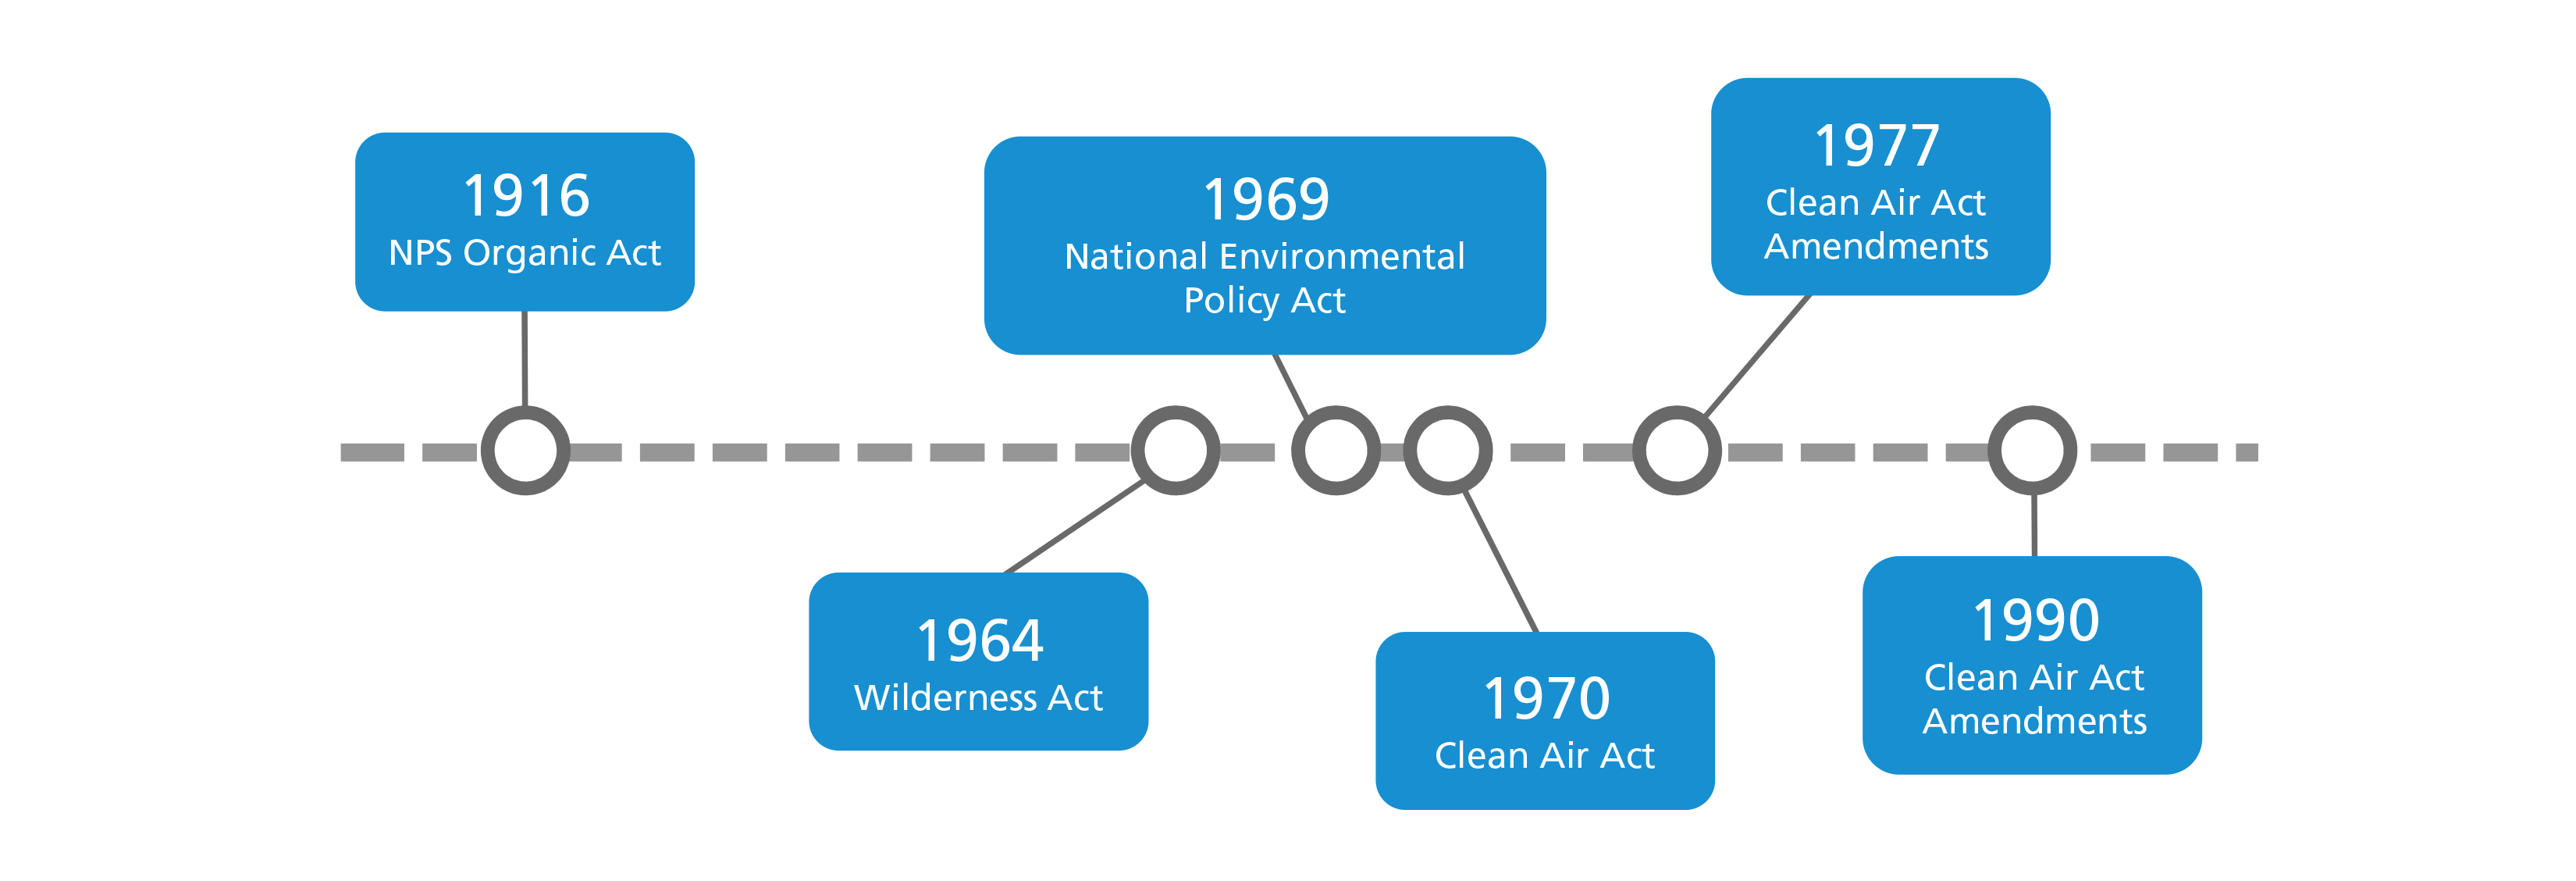 Graphic timeline showing major laws pertaining air. From left to right: 1916 NPS Organic Act, 1964 Wilderness Act, 1969 National Environmental Policy Act, 1970 Clean Air Act, 1977 Clean Air Act Amendments, 1990 Clean Air Act Amendments.